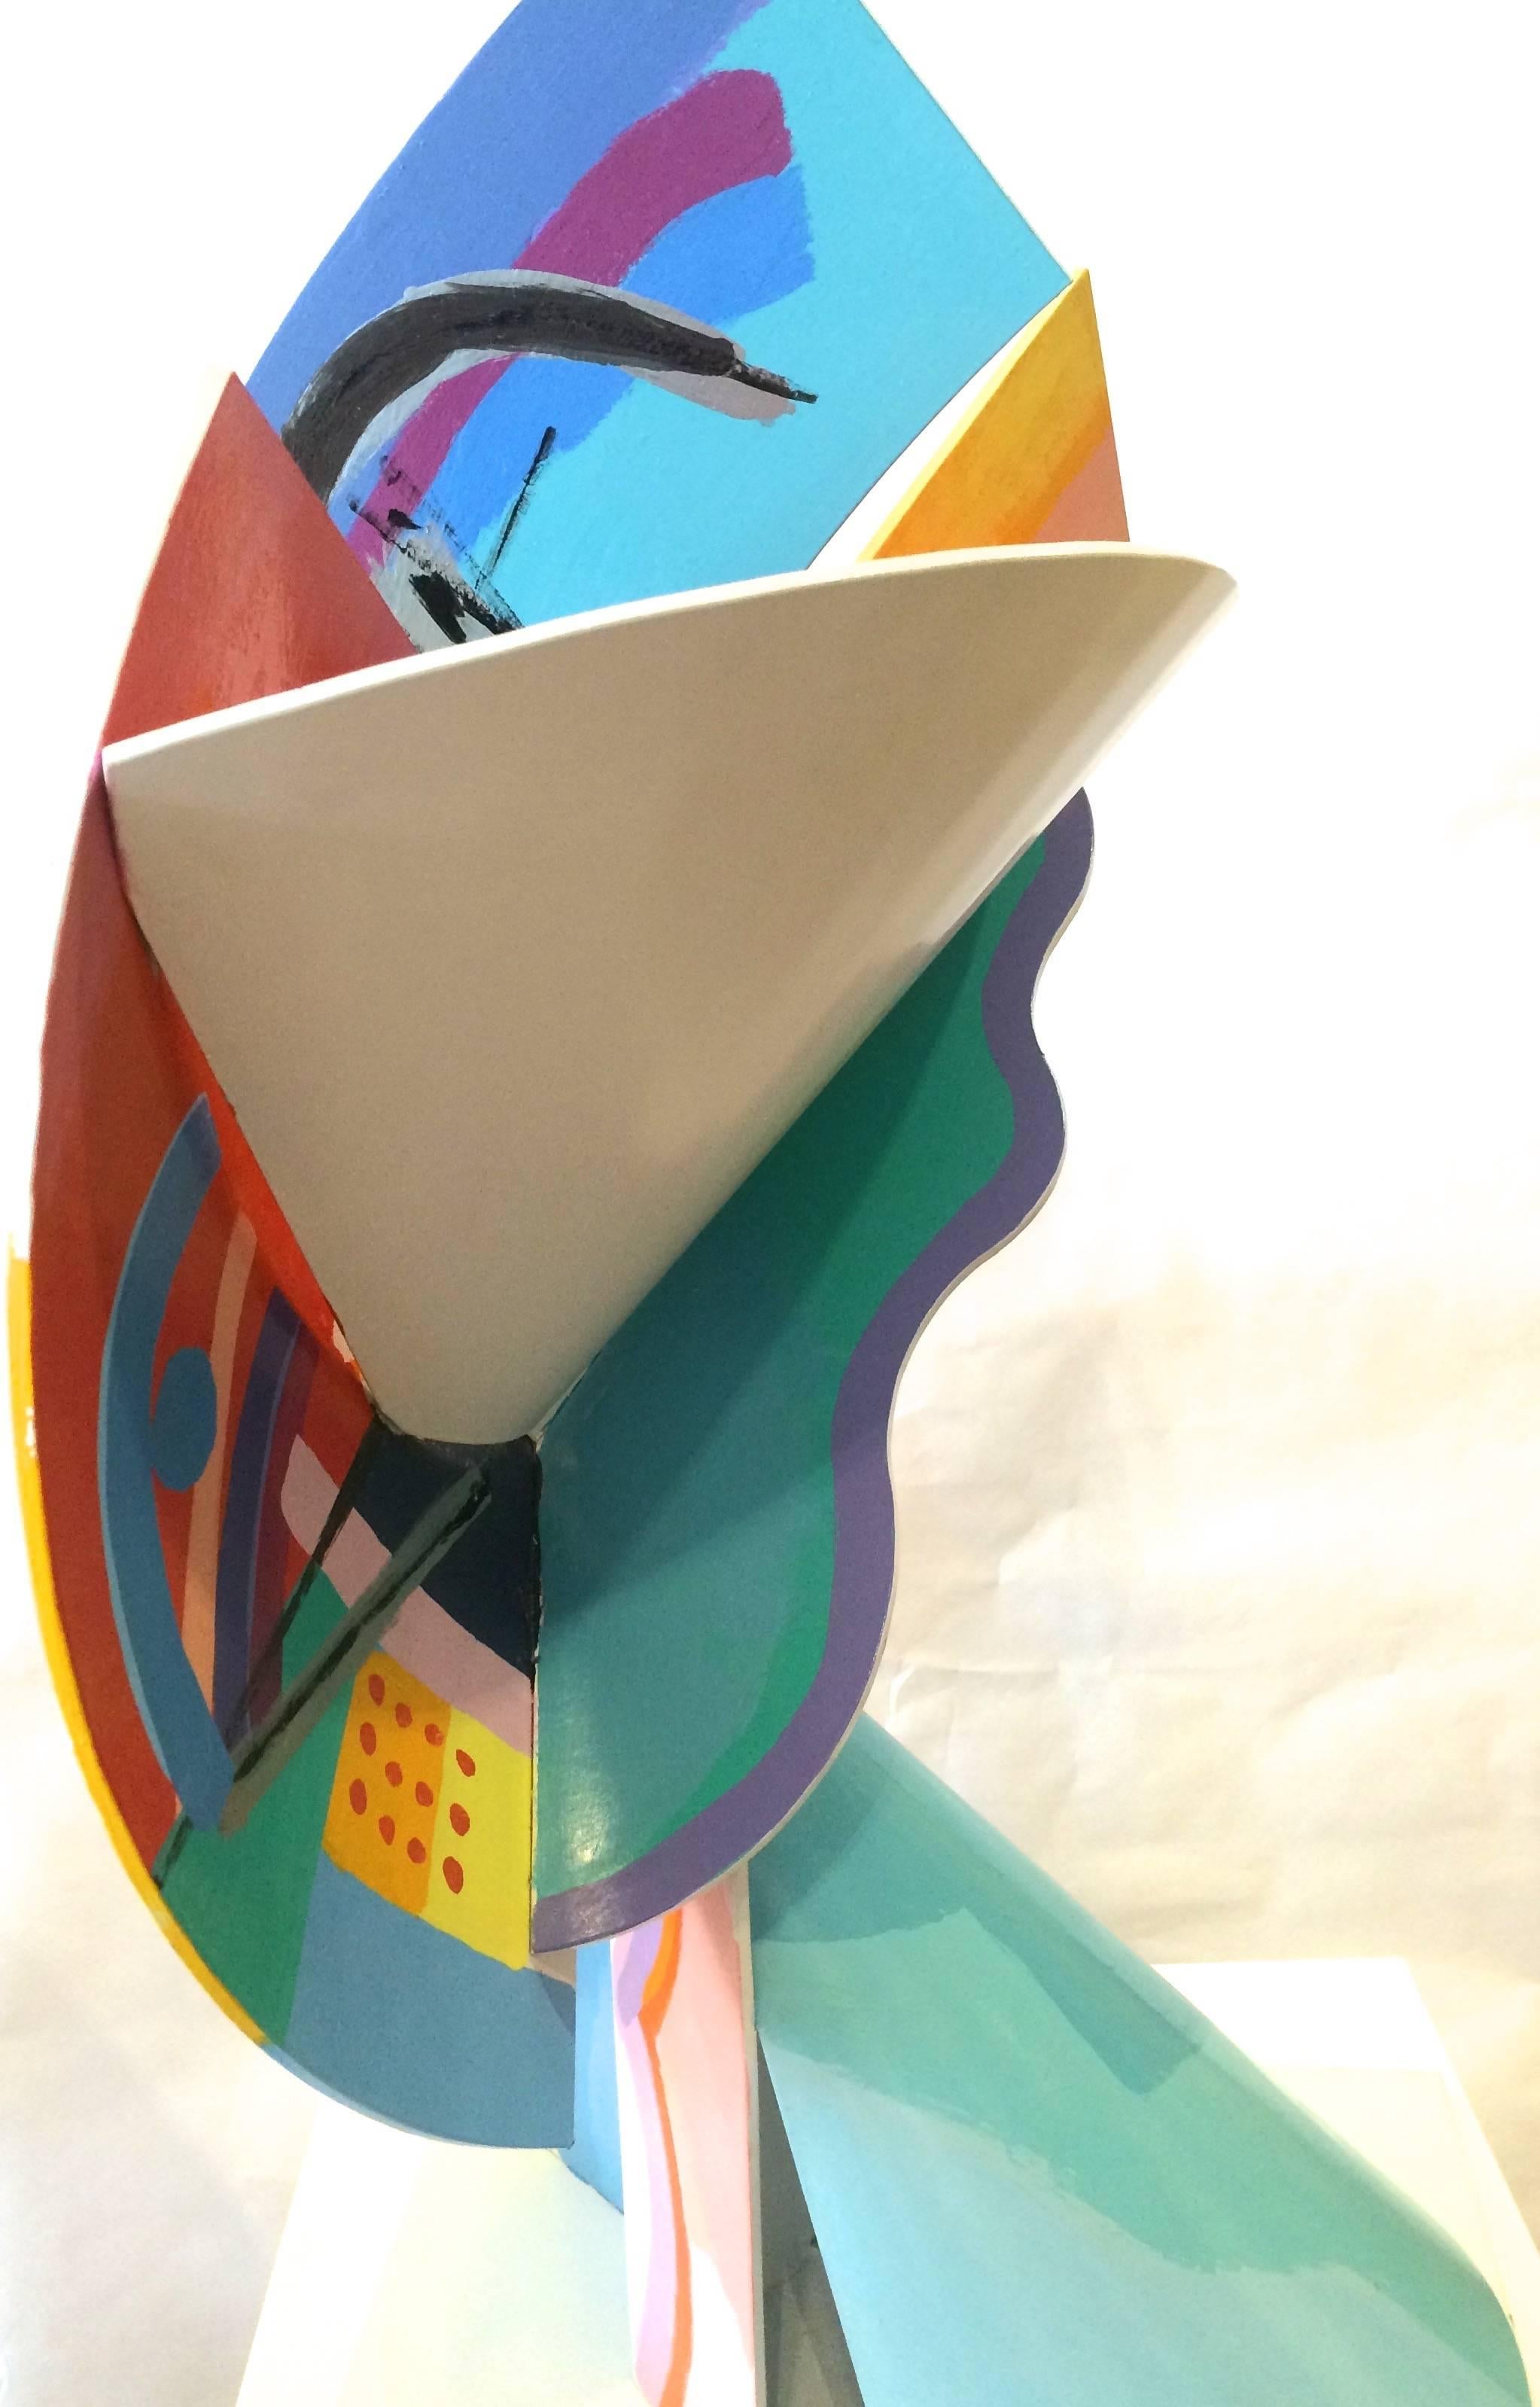 Artist proof, signed abstract form metal sculpture painted with vibrant colors.
Calman Shemi, sculptor and painter, was born in Argentina in 1939.  A graduate of the school of Sculpture and Ceramics in Mendoza, Calman Shemi was a student of the